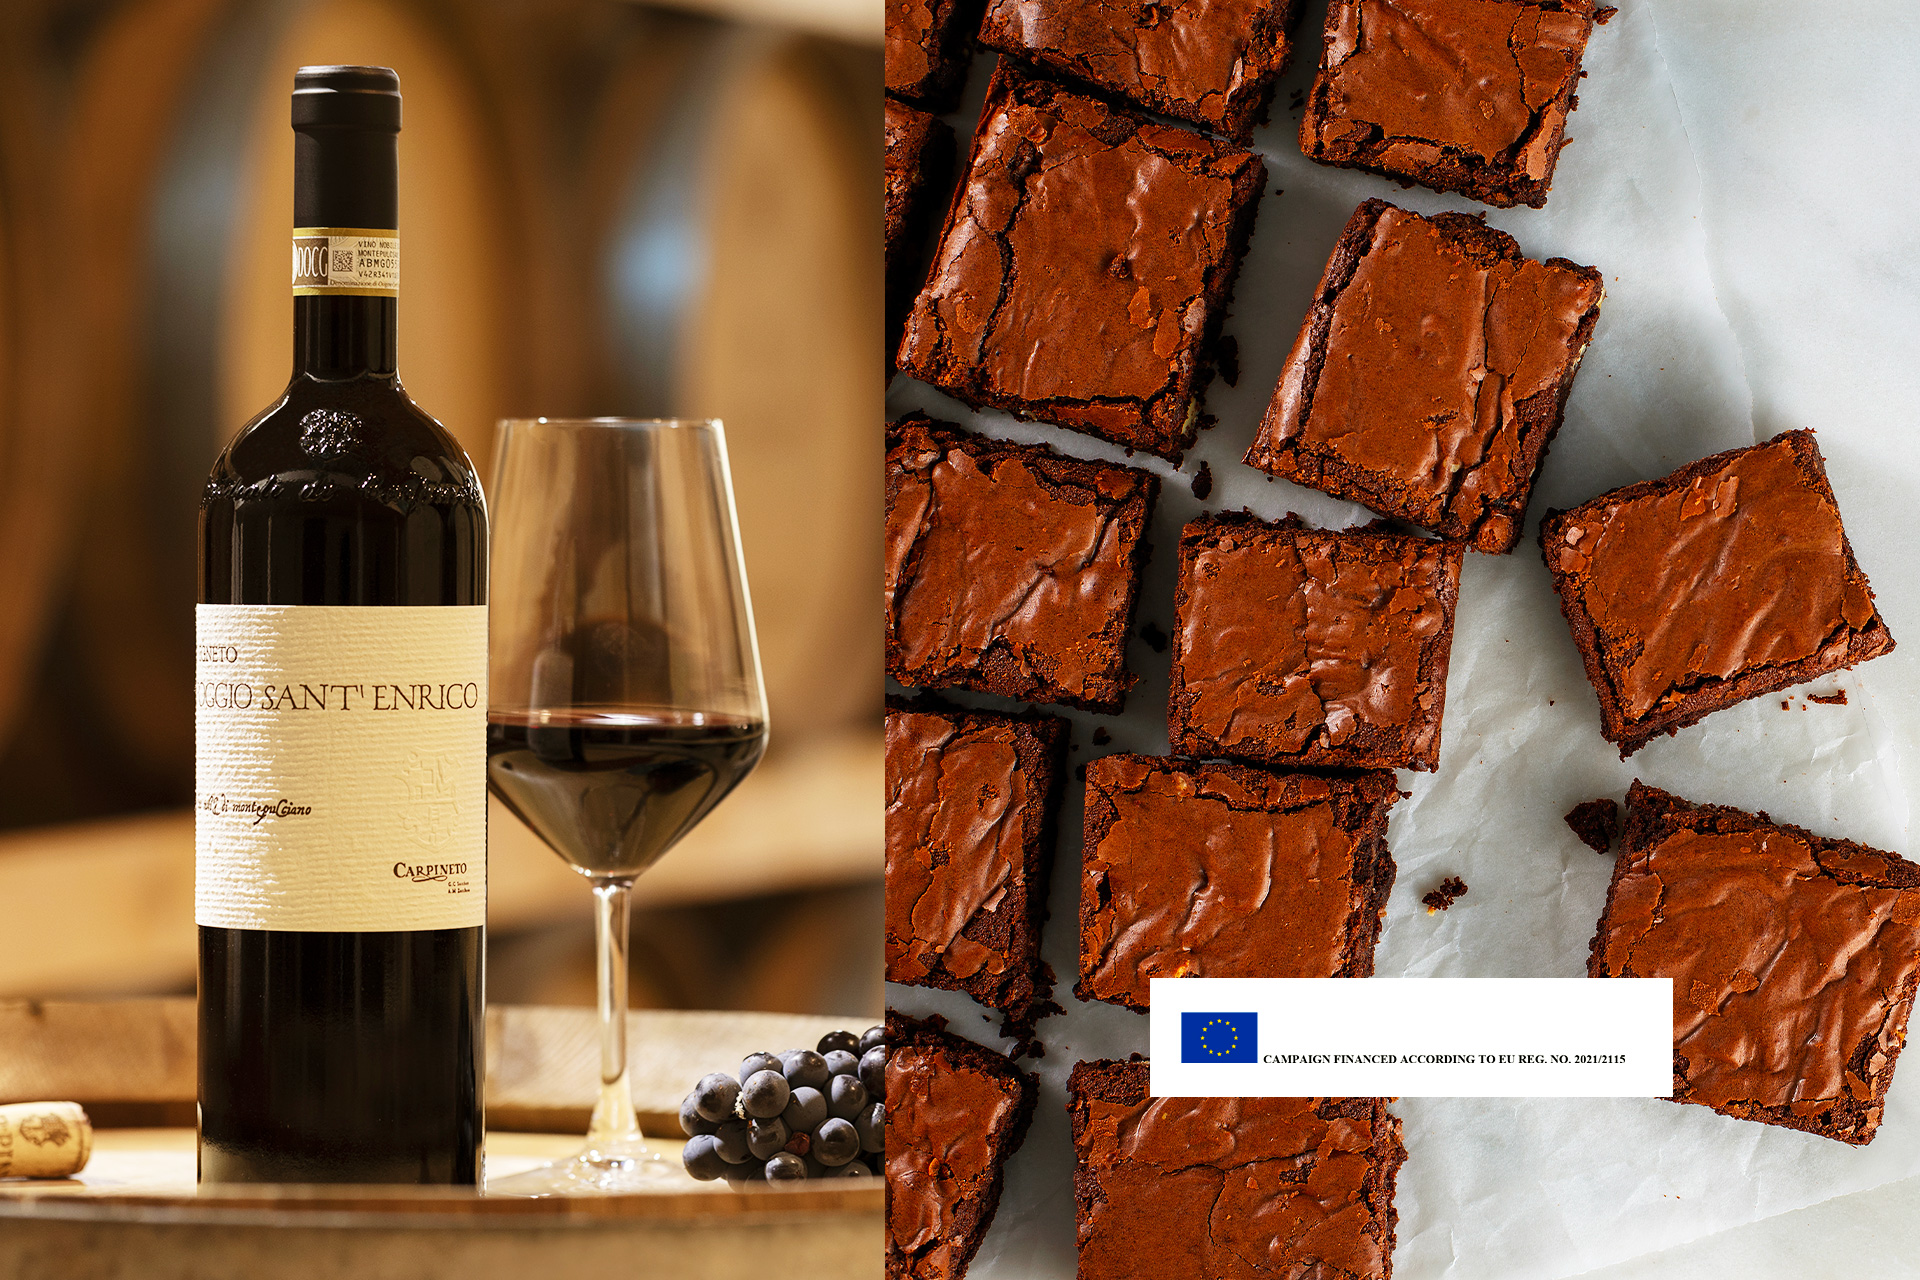 Chocolate brownies and red wine: our suggestion and recipe
